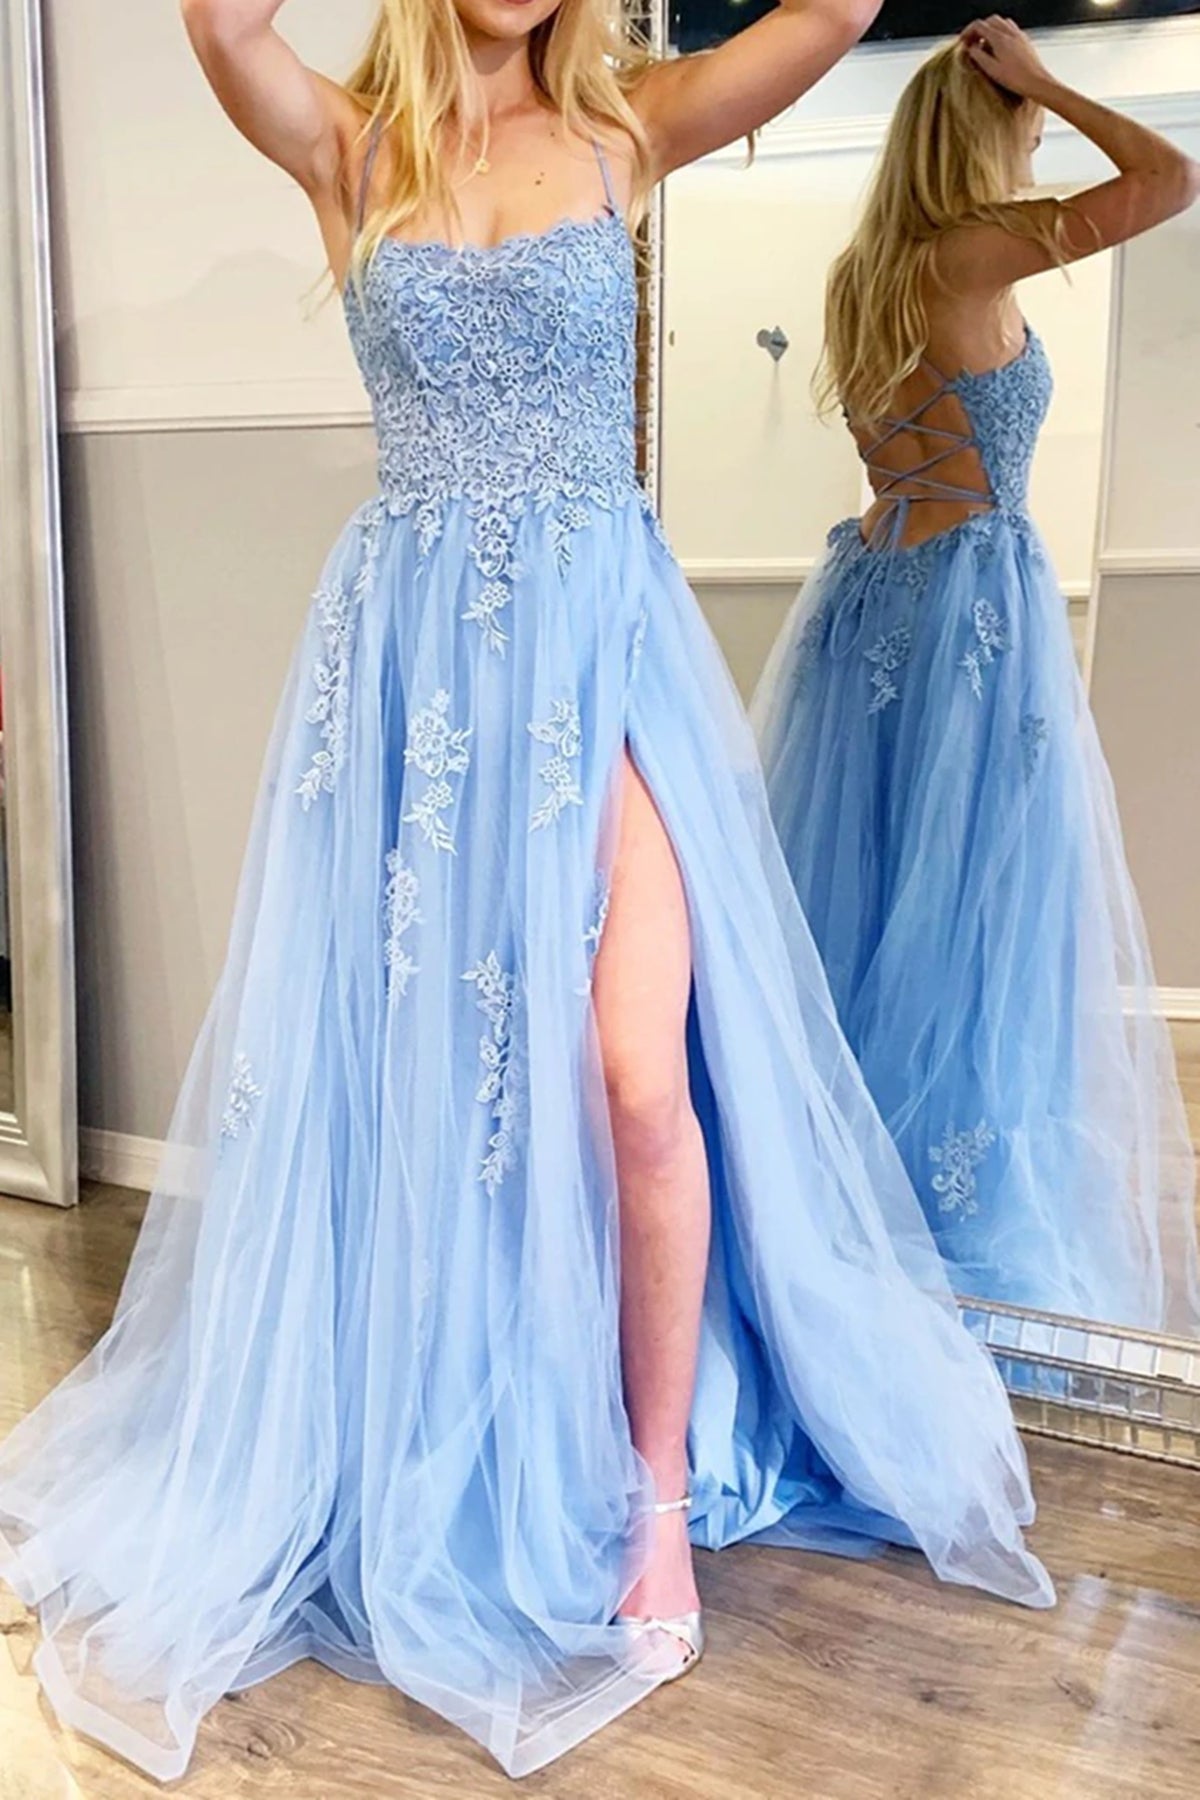 Fashion Criss-Cross Back Light Blue Lace Long Prom Dresses with High Slit, Backless Light Blue Lace Floral Formal Evening Dresses 